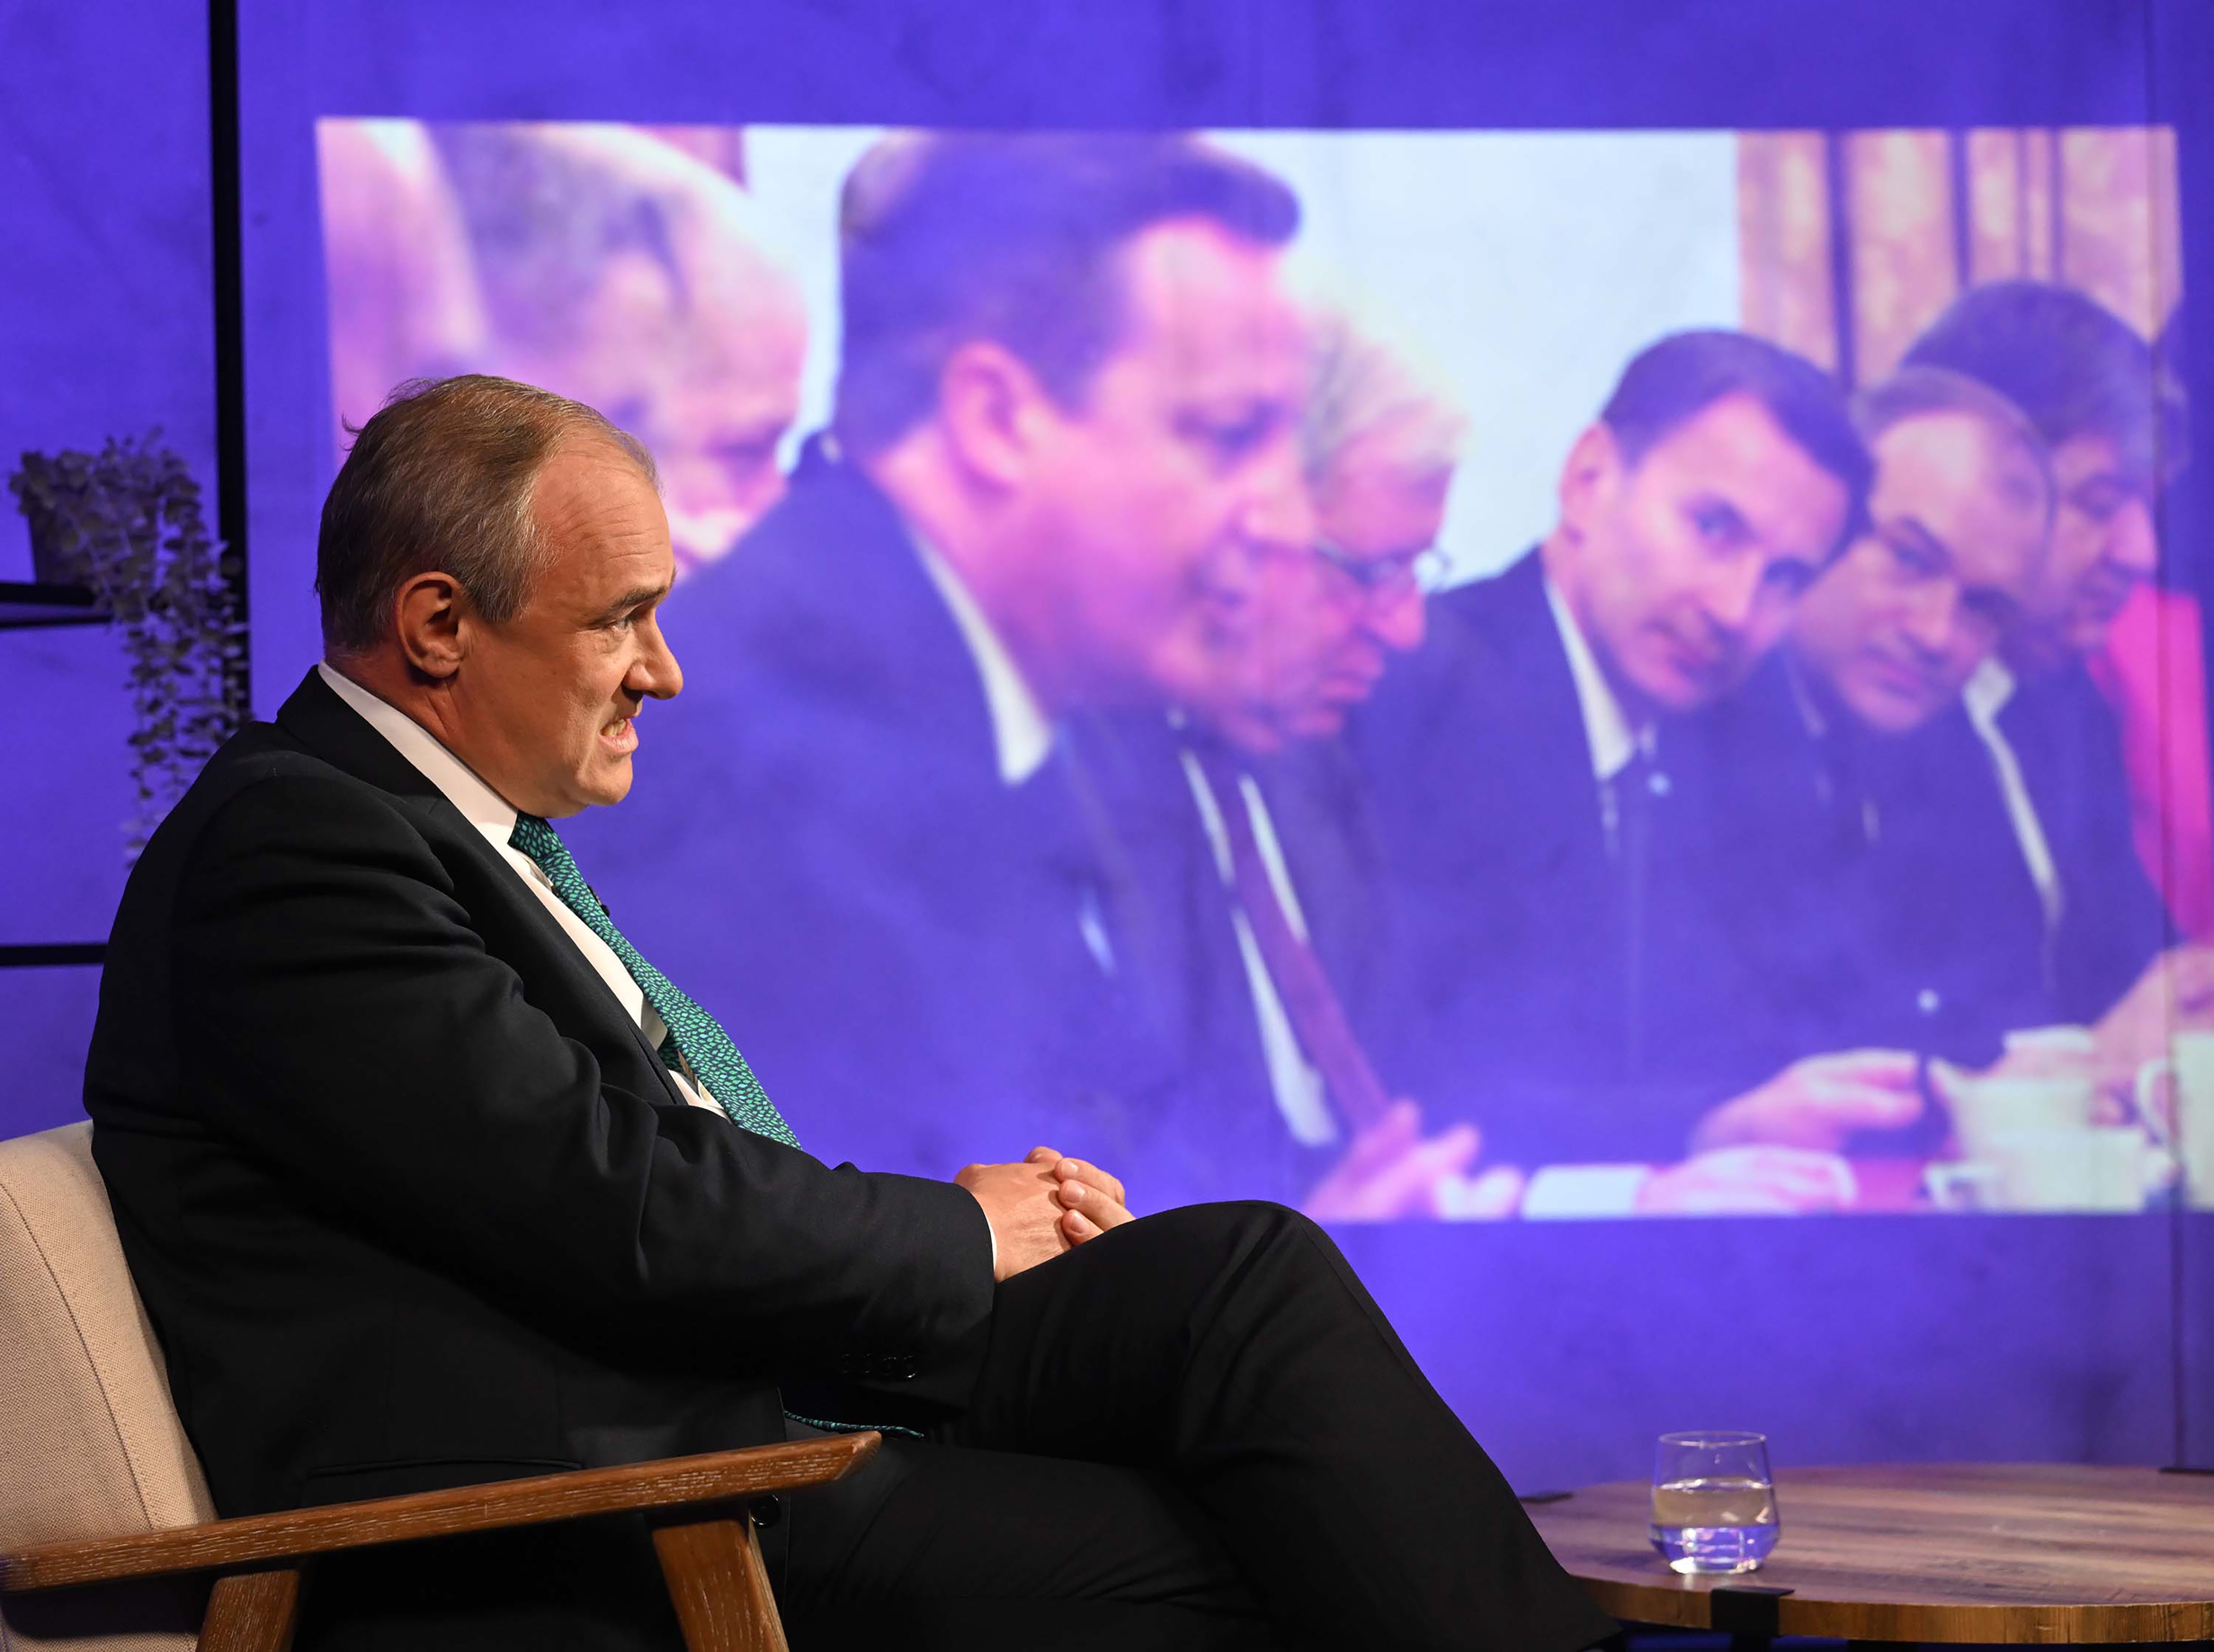 Sir Ed Davey previously served as a Cabinet minister (Jeff Overs/BBC/PA)